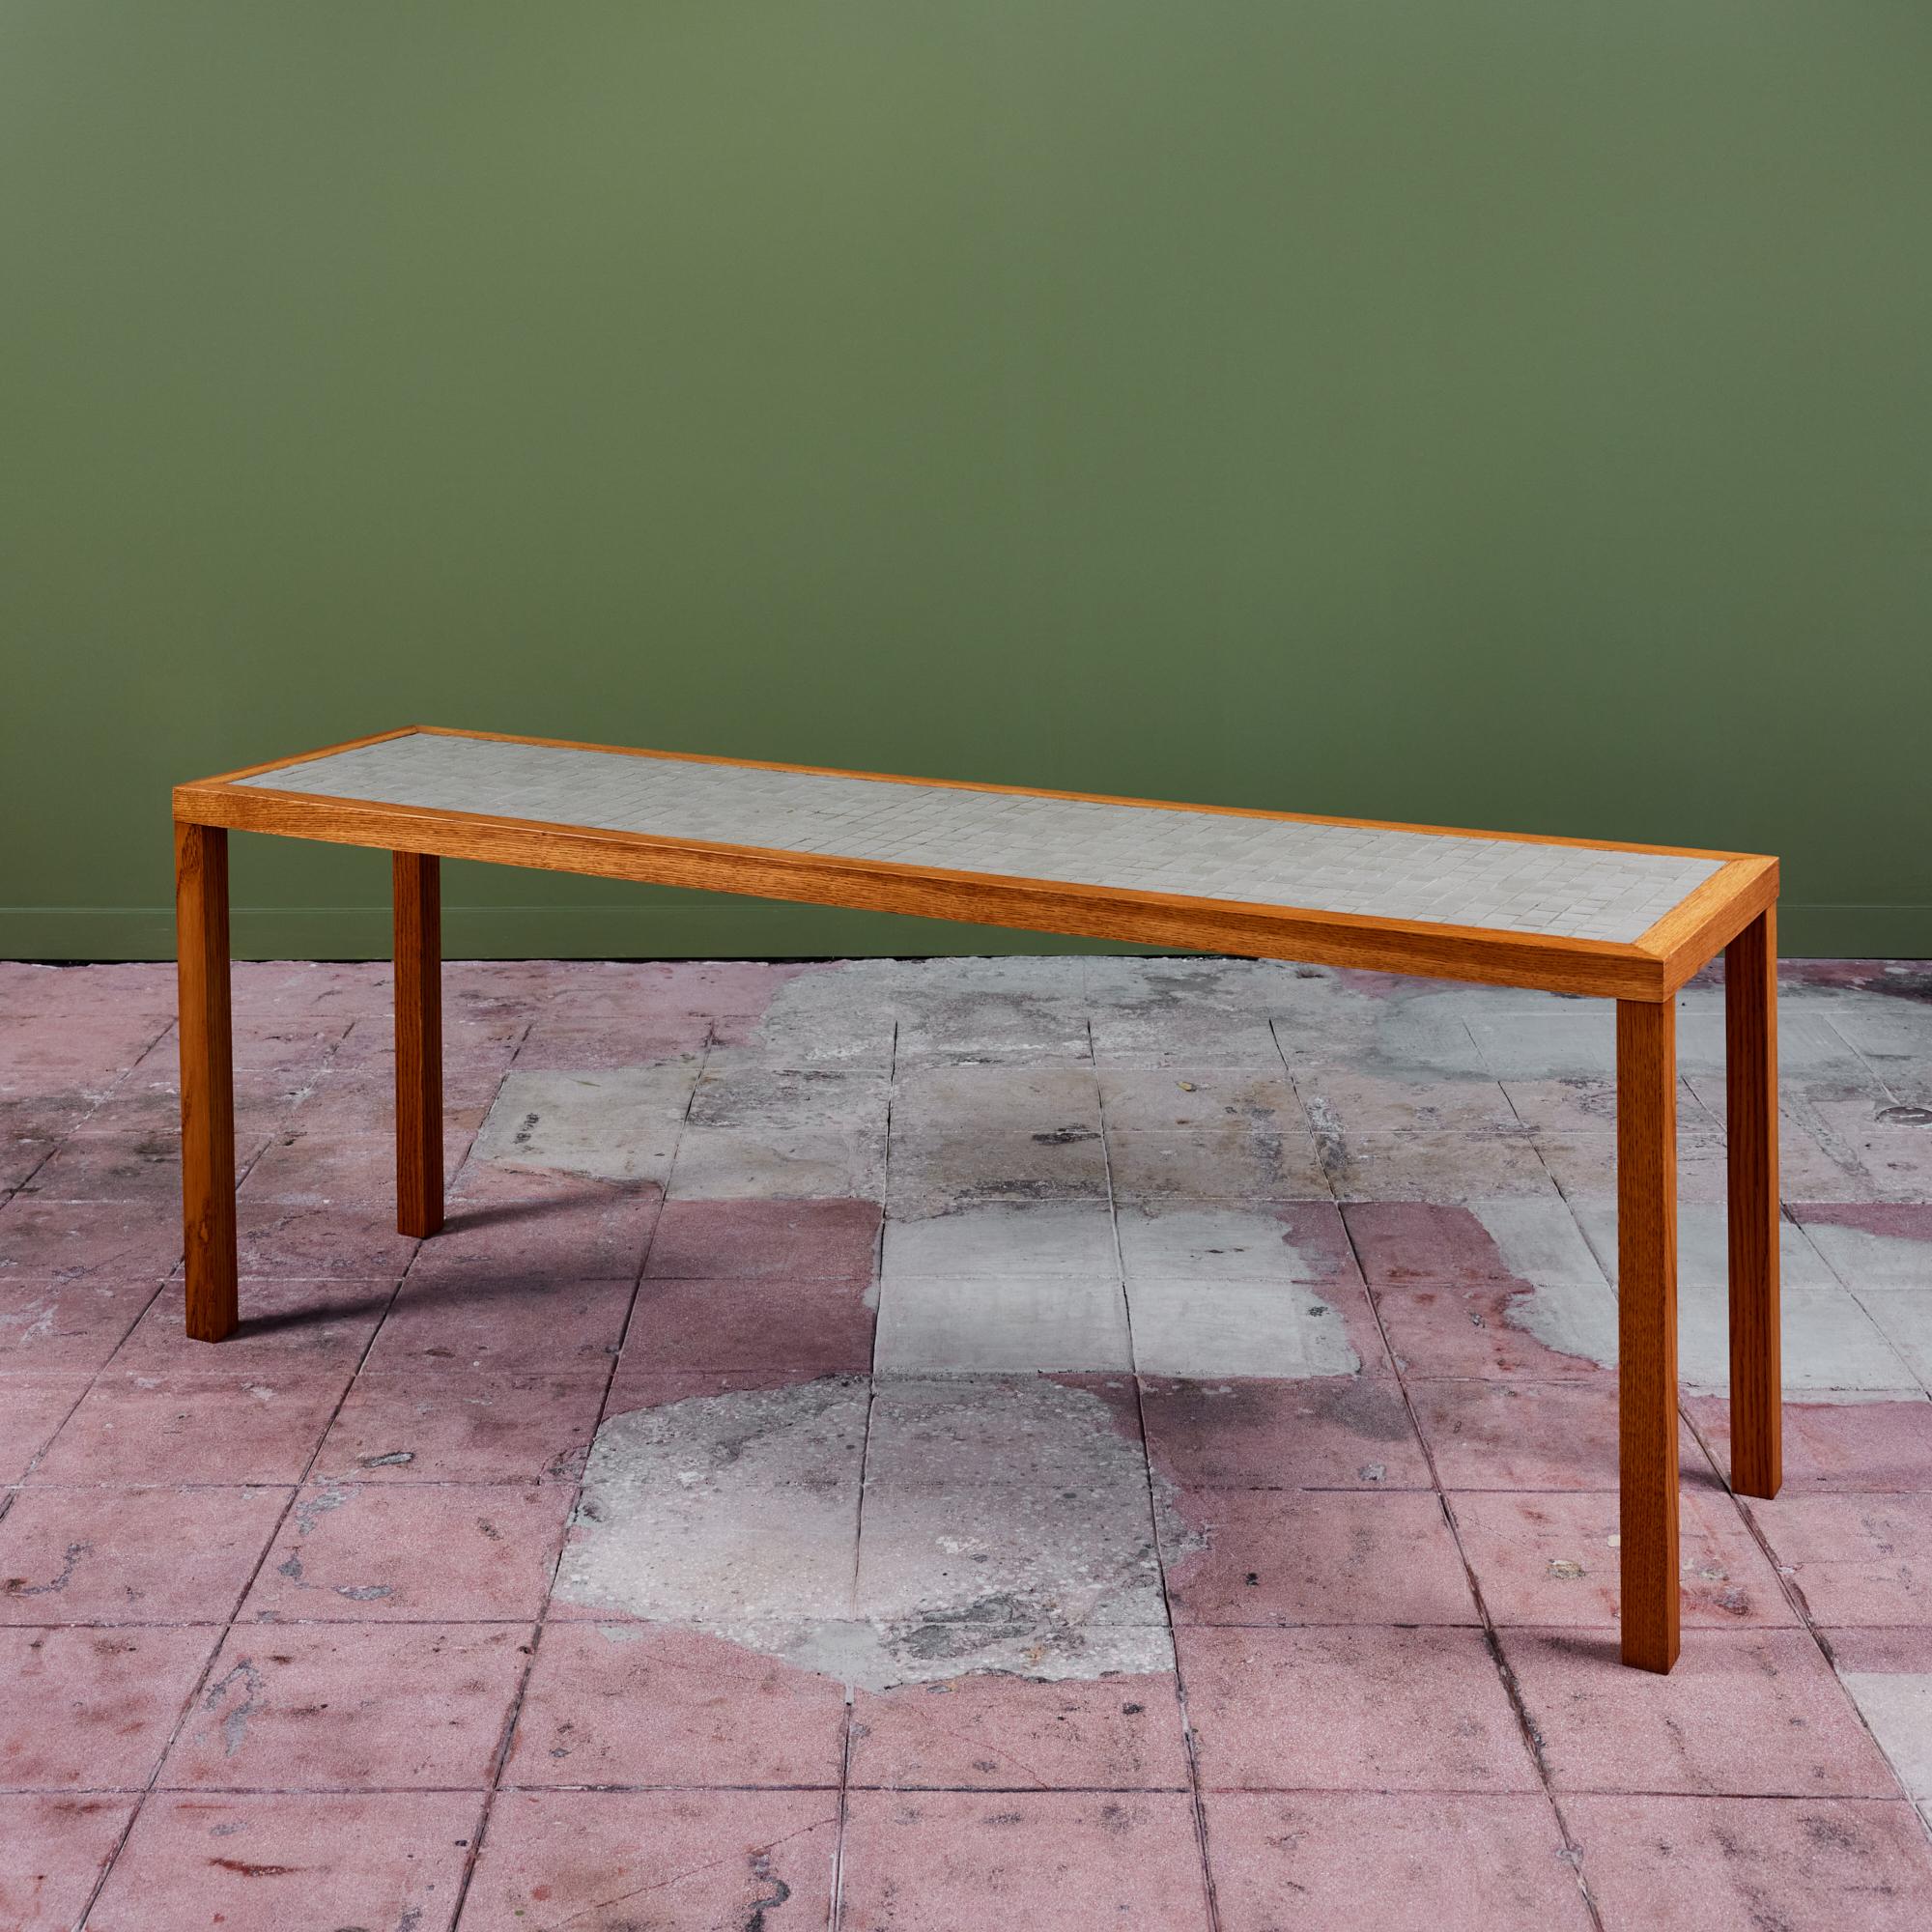 Console table by Gordon & Jane Martz. The table top is inlaid with square ceramic tiles in a speckled light gray. The frame of the table and four legs are solid oak.

Dimensions
72.25